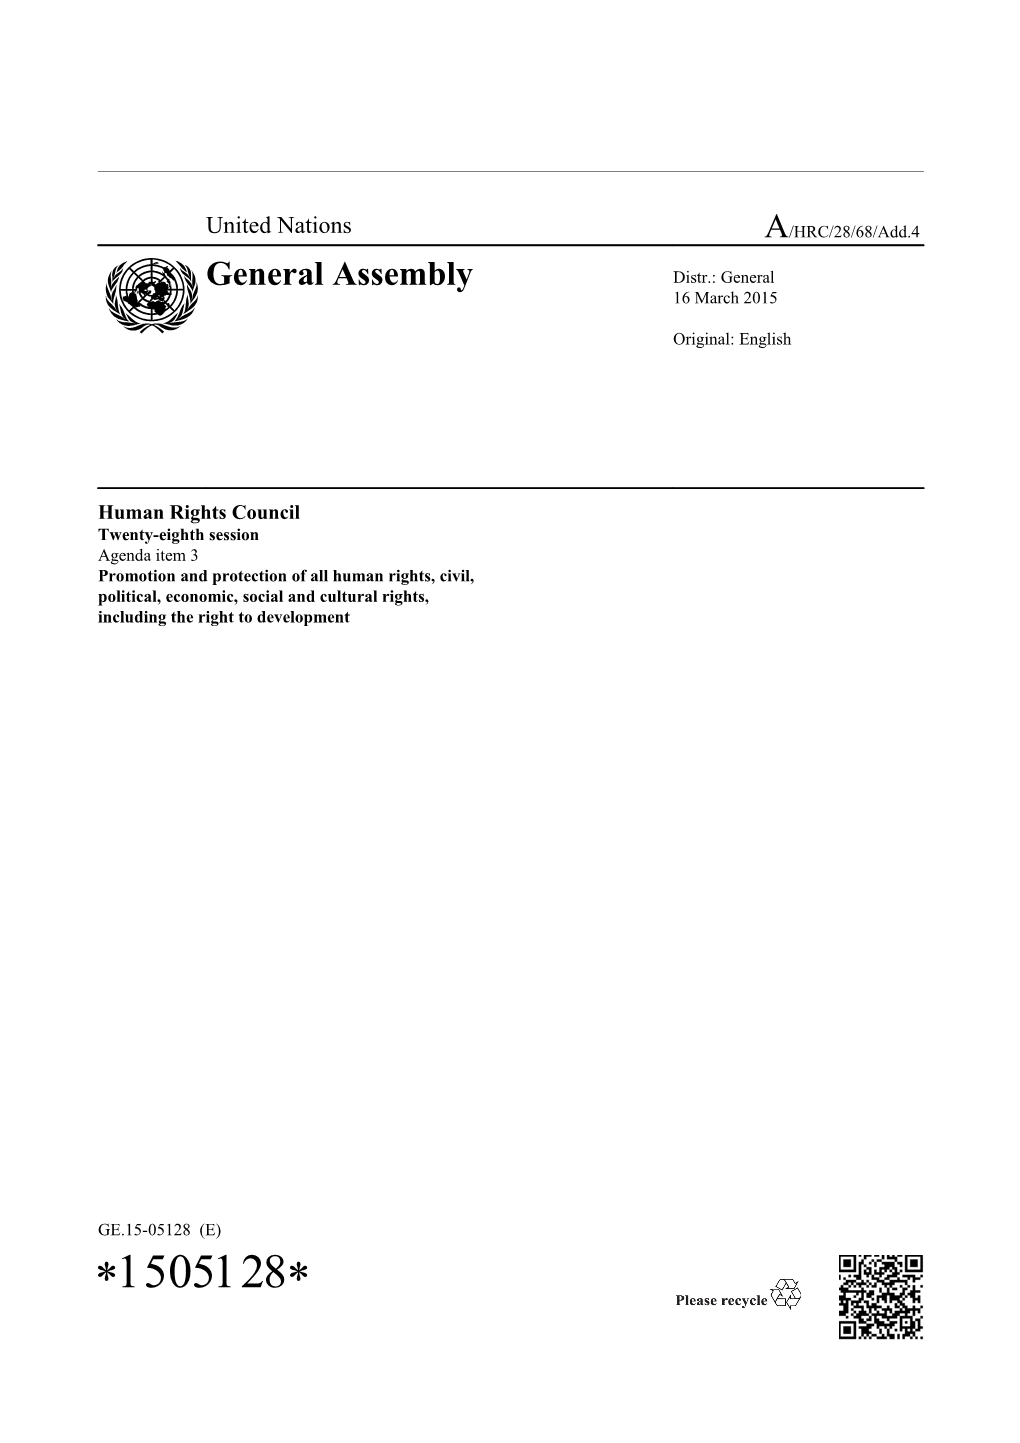 Report of the Special Rapporteur on Torture - Mission to Gambia in English